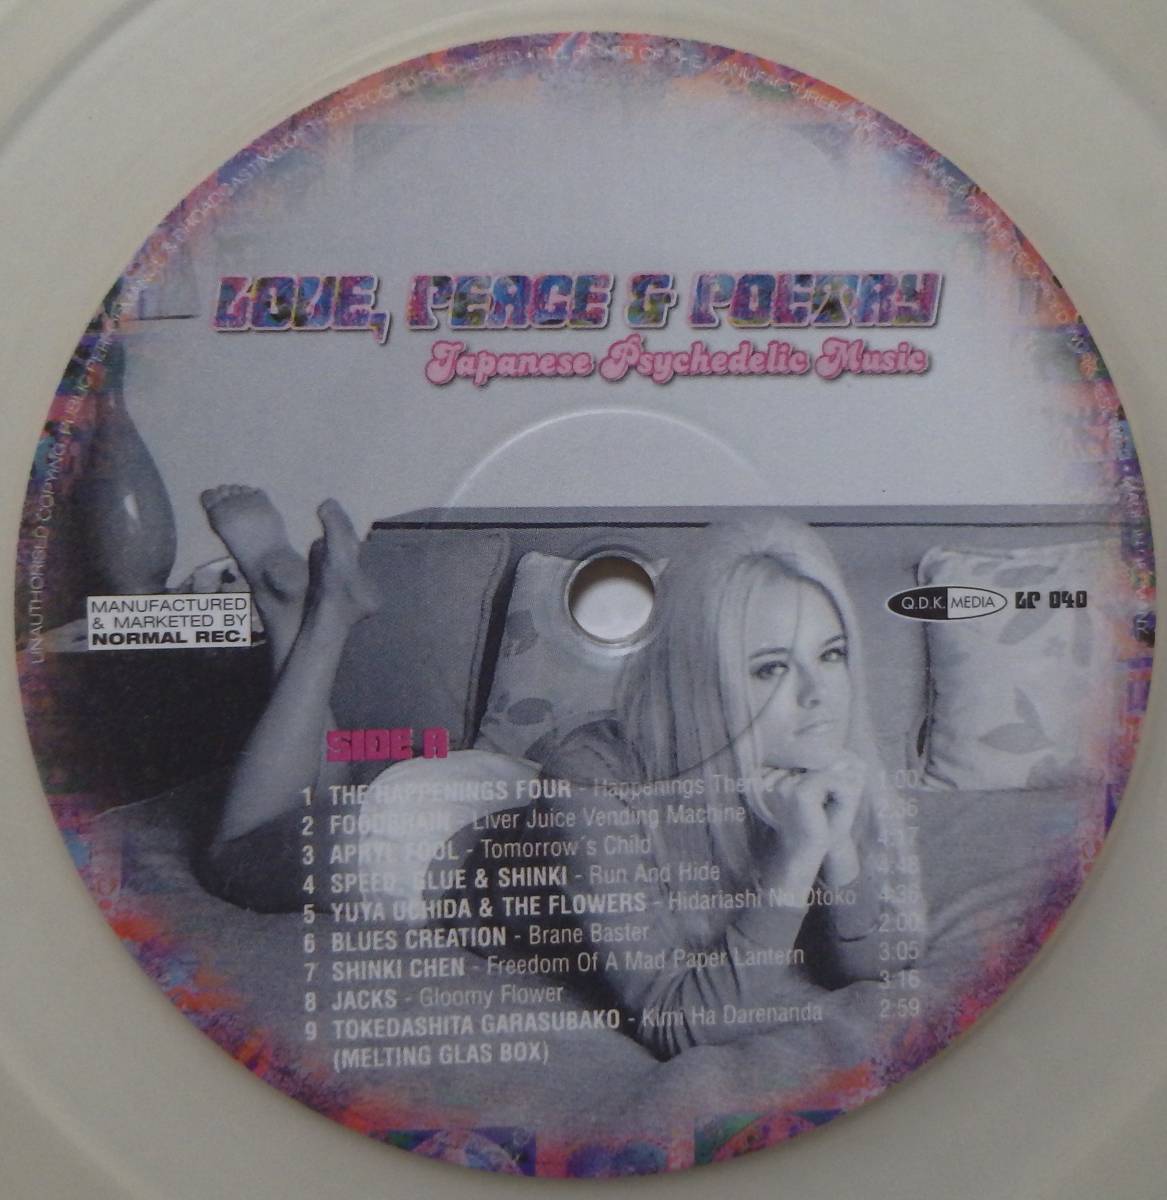 【VPS004】V.A.(サイケ)「Love, Peace & Poetry (Japanese Psychedelic Music)」, 2001 GERMANY Comp./半透明盤　★GS/サイケ/プログレ_画像6